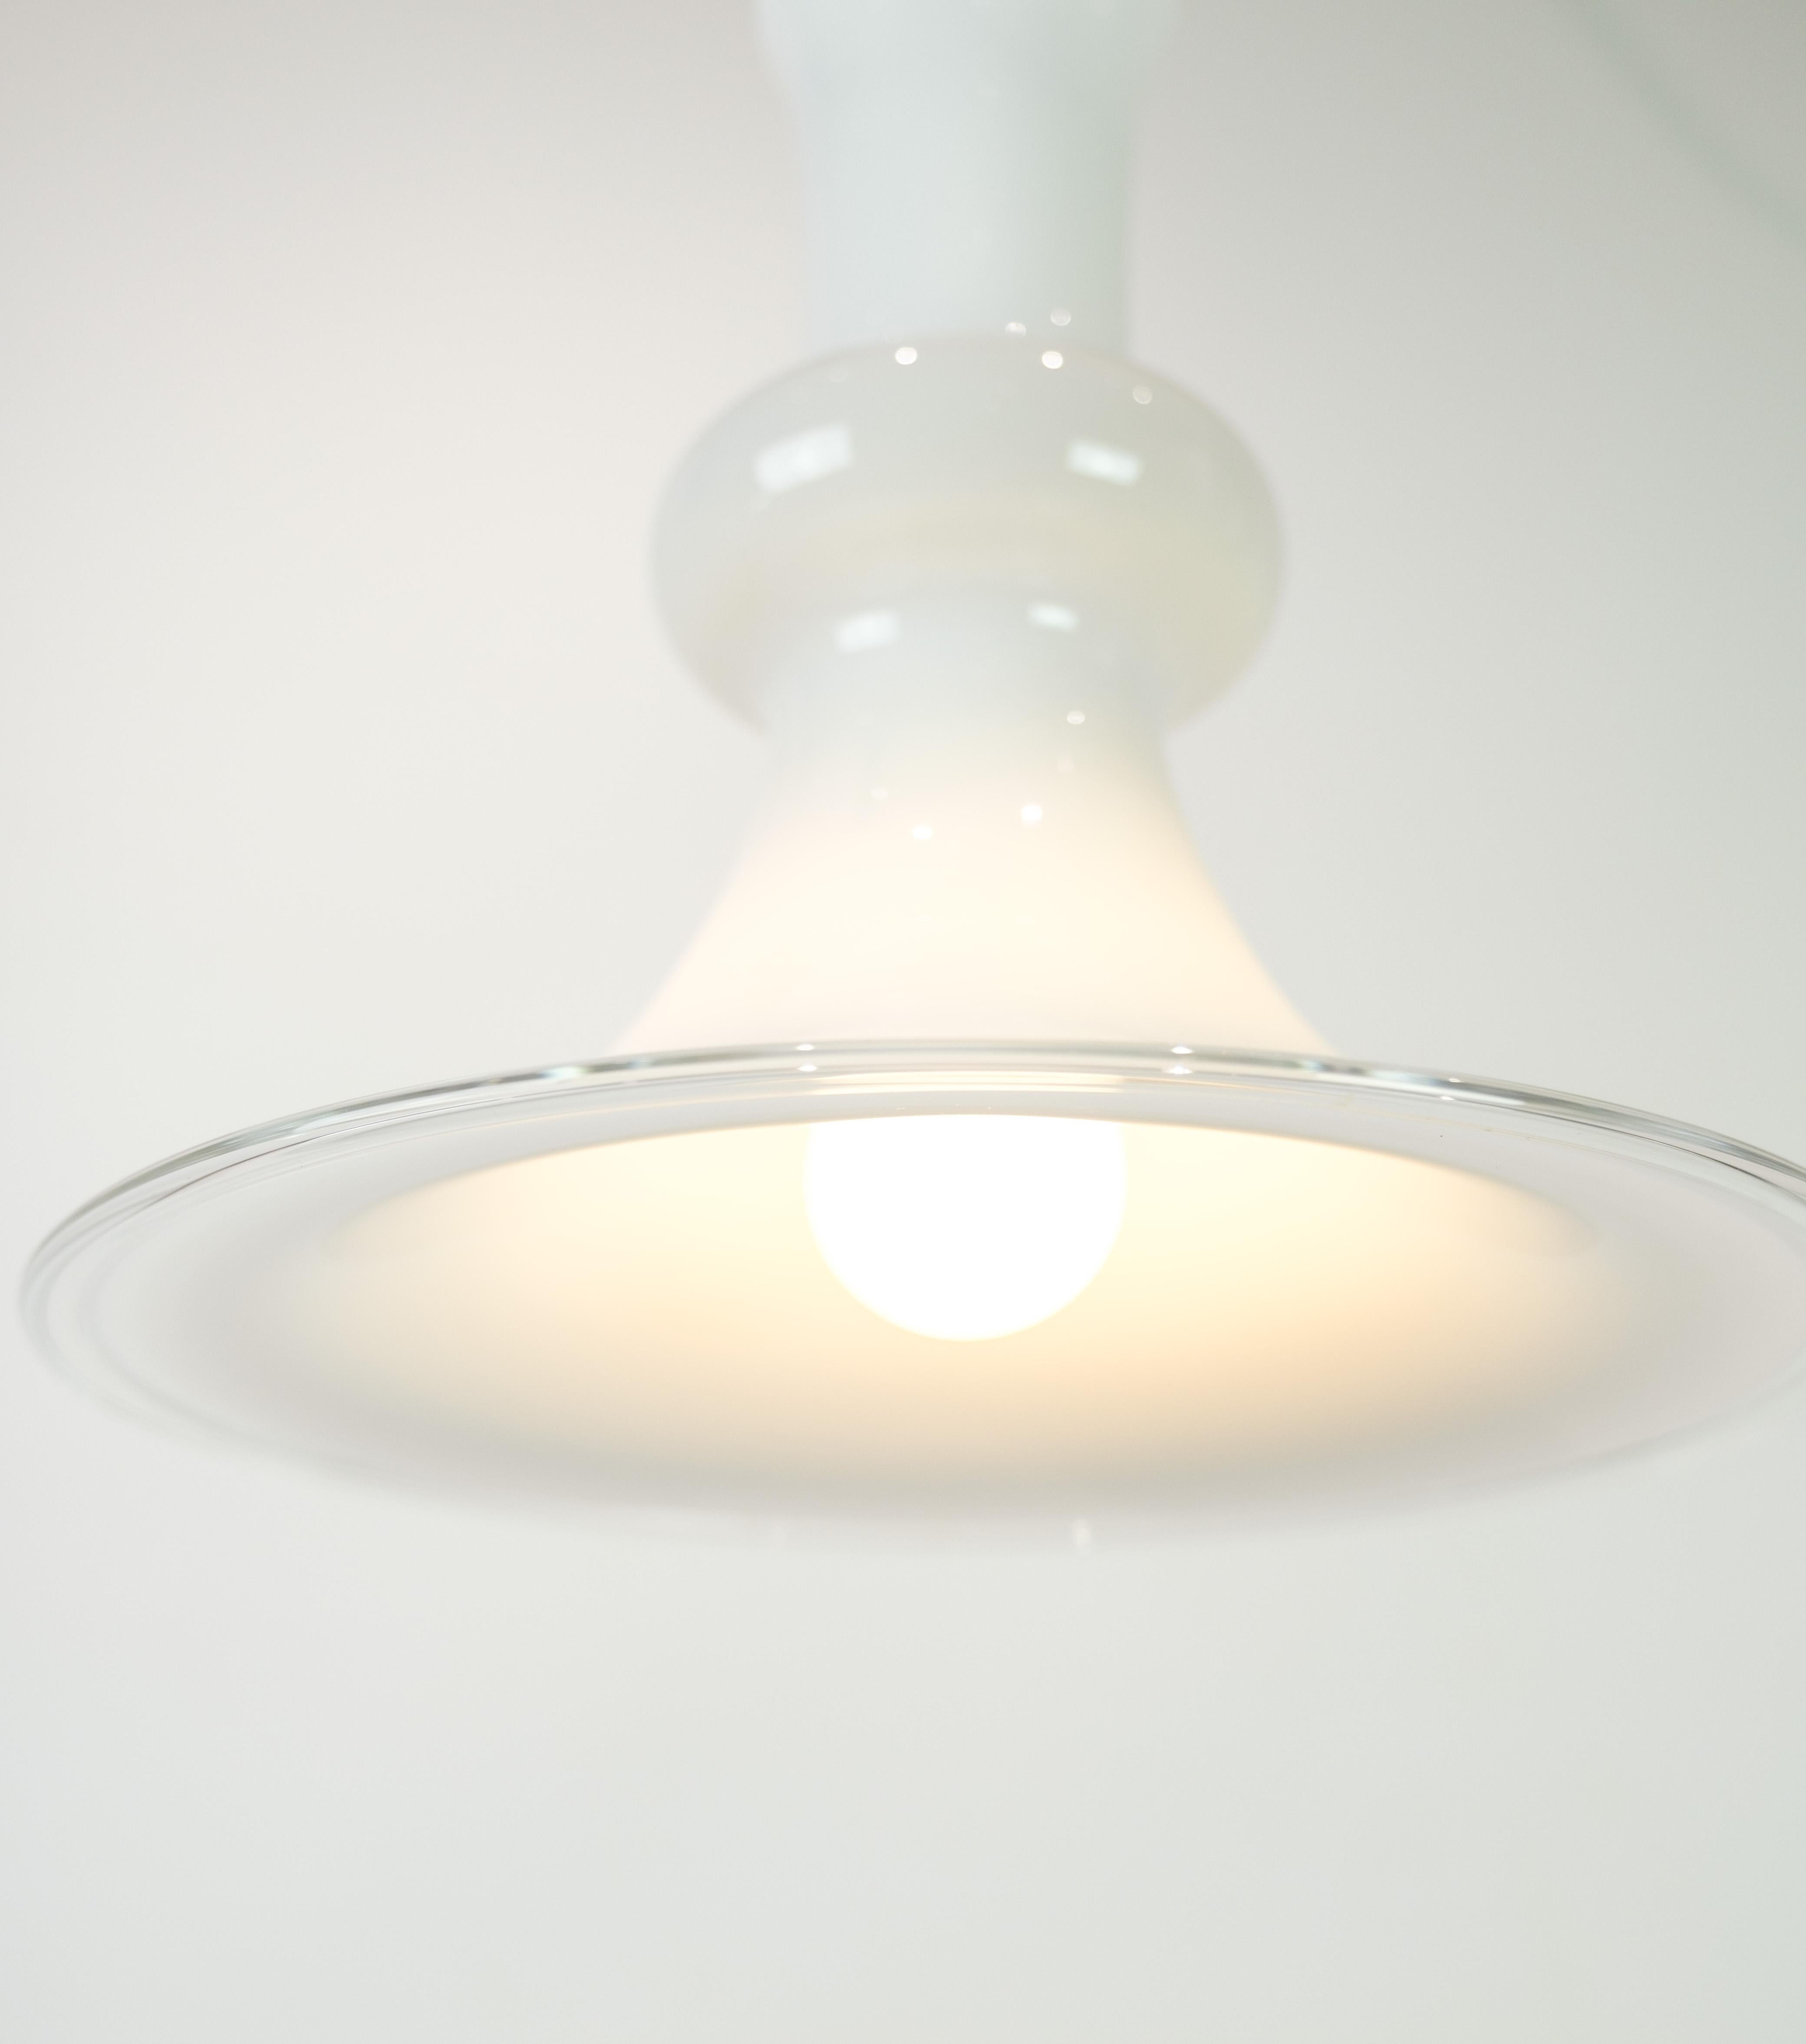 Pendant model Etude 1 is a beautiful example of Michael Bang's design from 1978. The pendant is made of clear and white opal glass and is manufactured by Holmegaard, one of Denmark's most renowned glass manufacturers.

The design of the pendant is